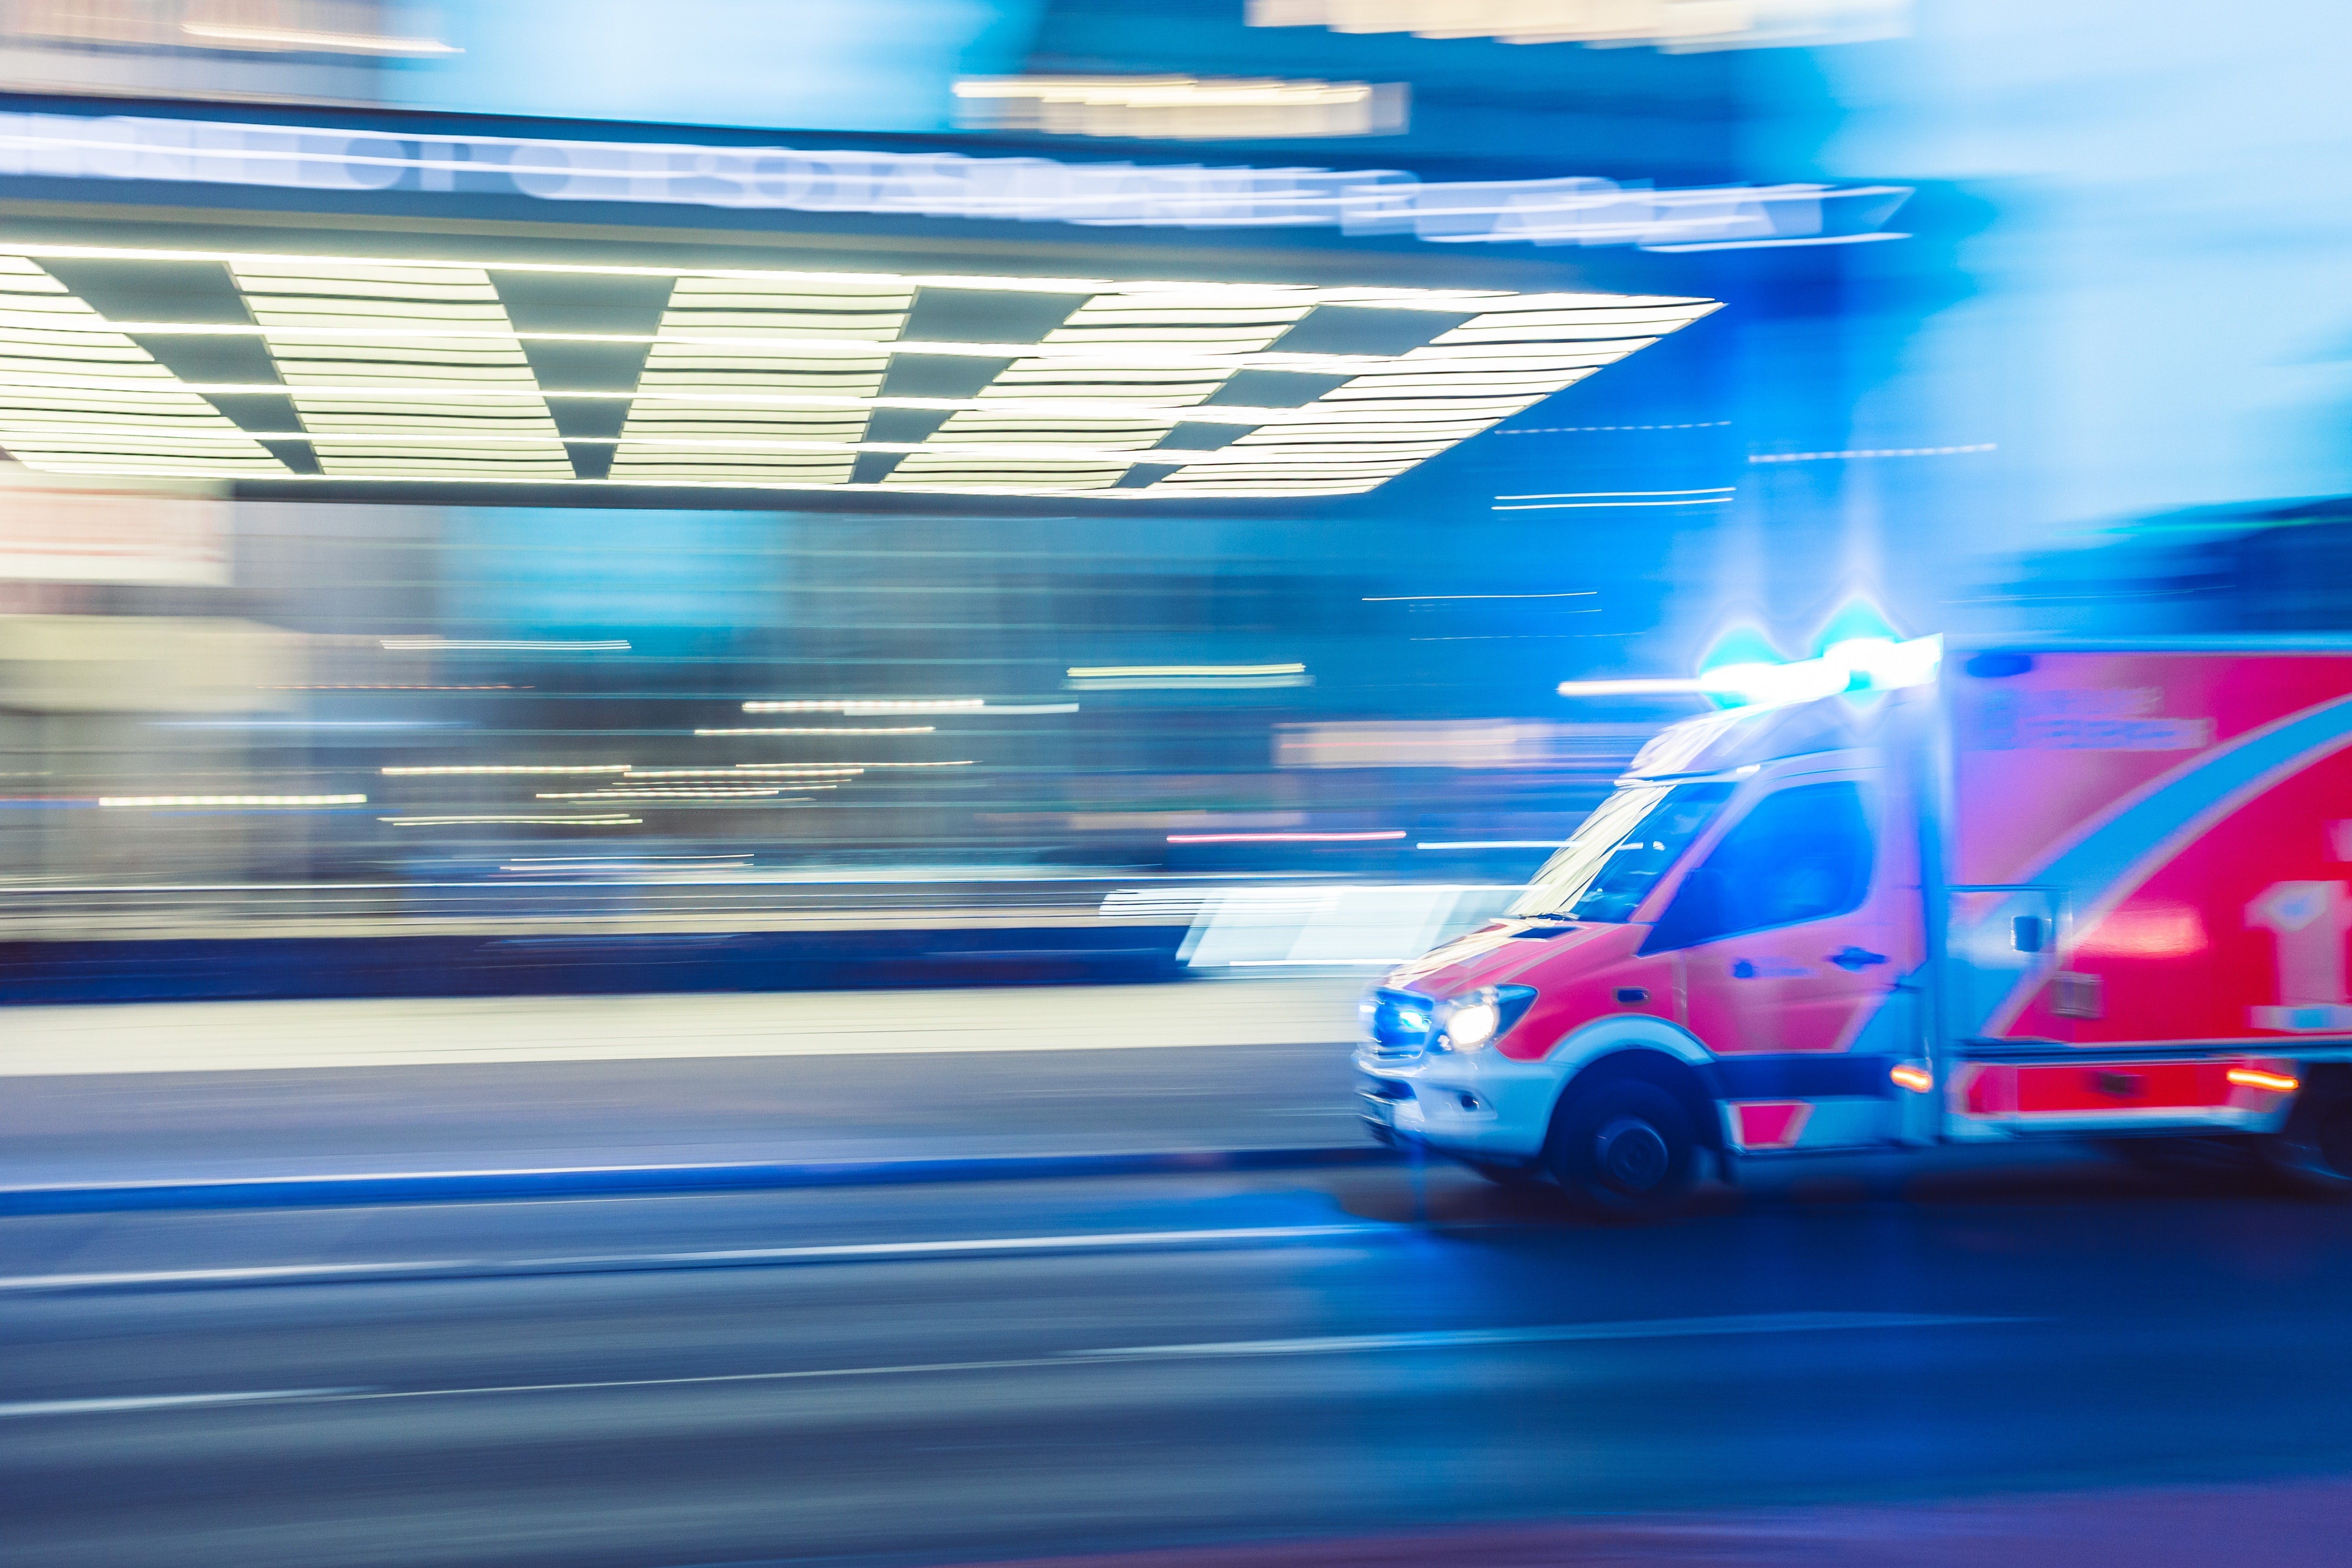 An ambulance with lights on in a time-lapse image